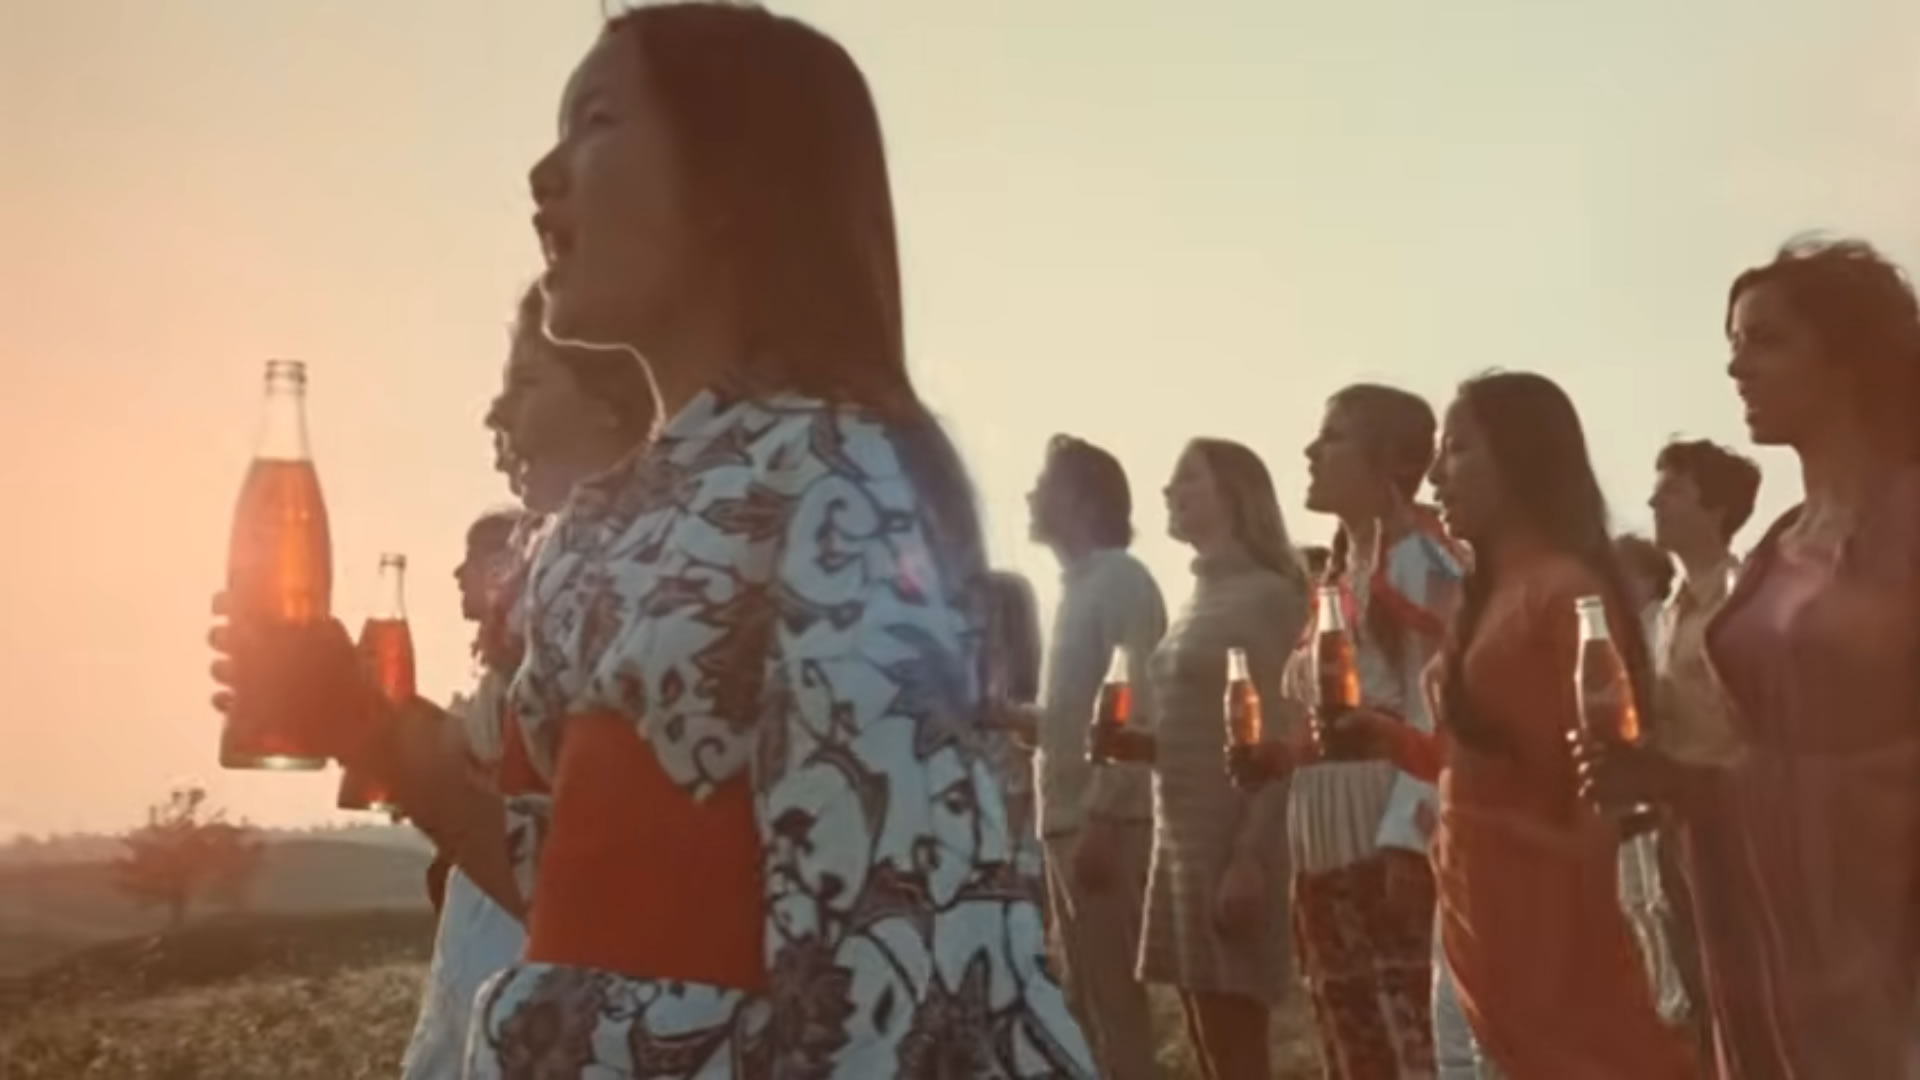 Scene from Hilltop Video with singing people